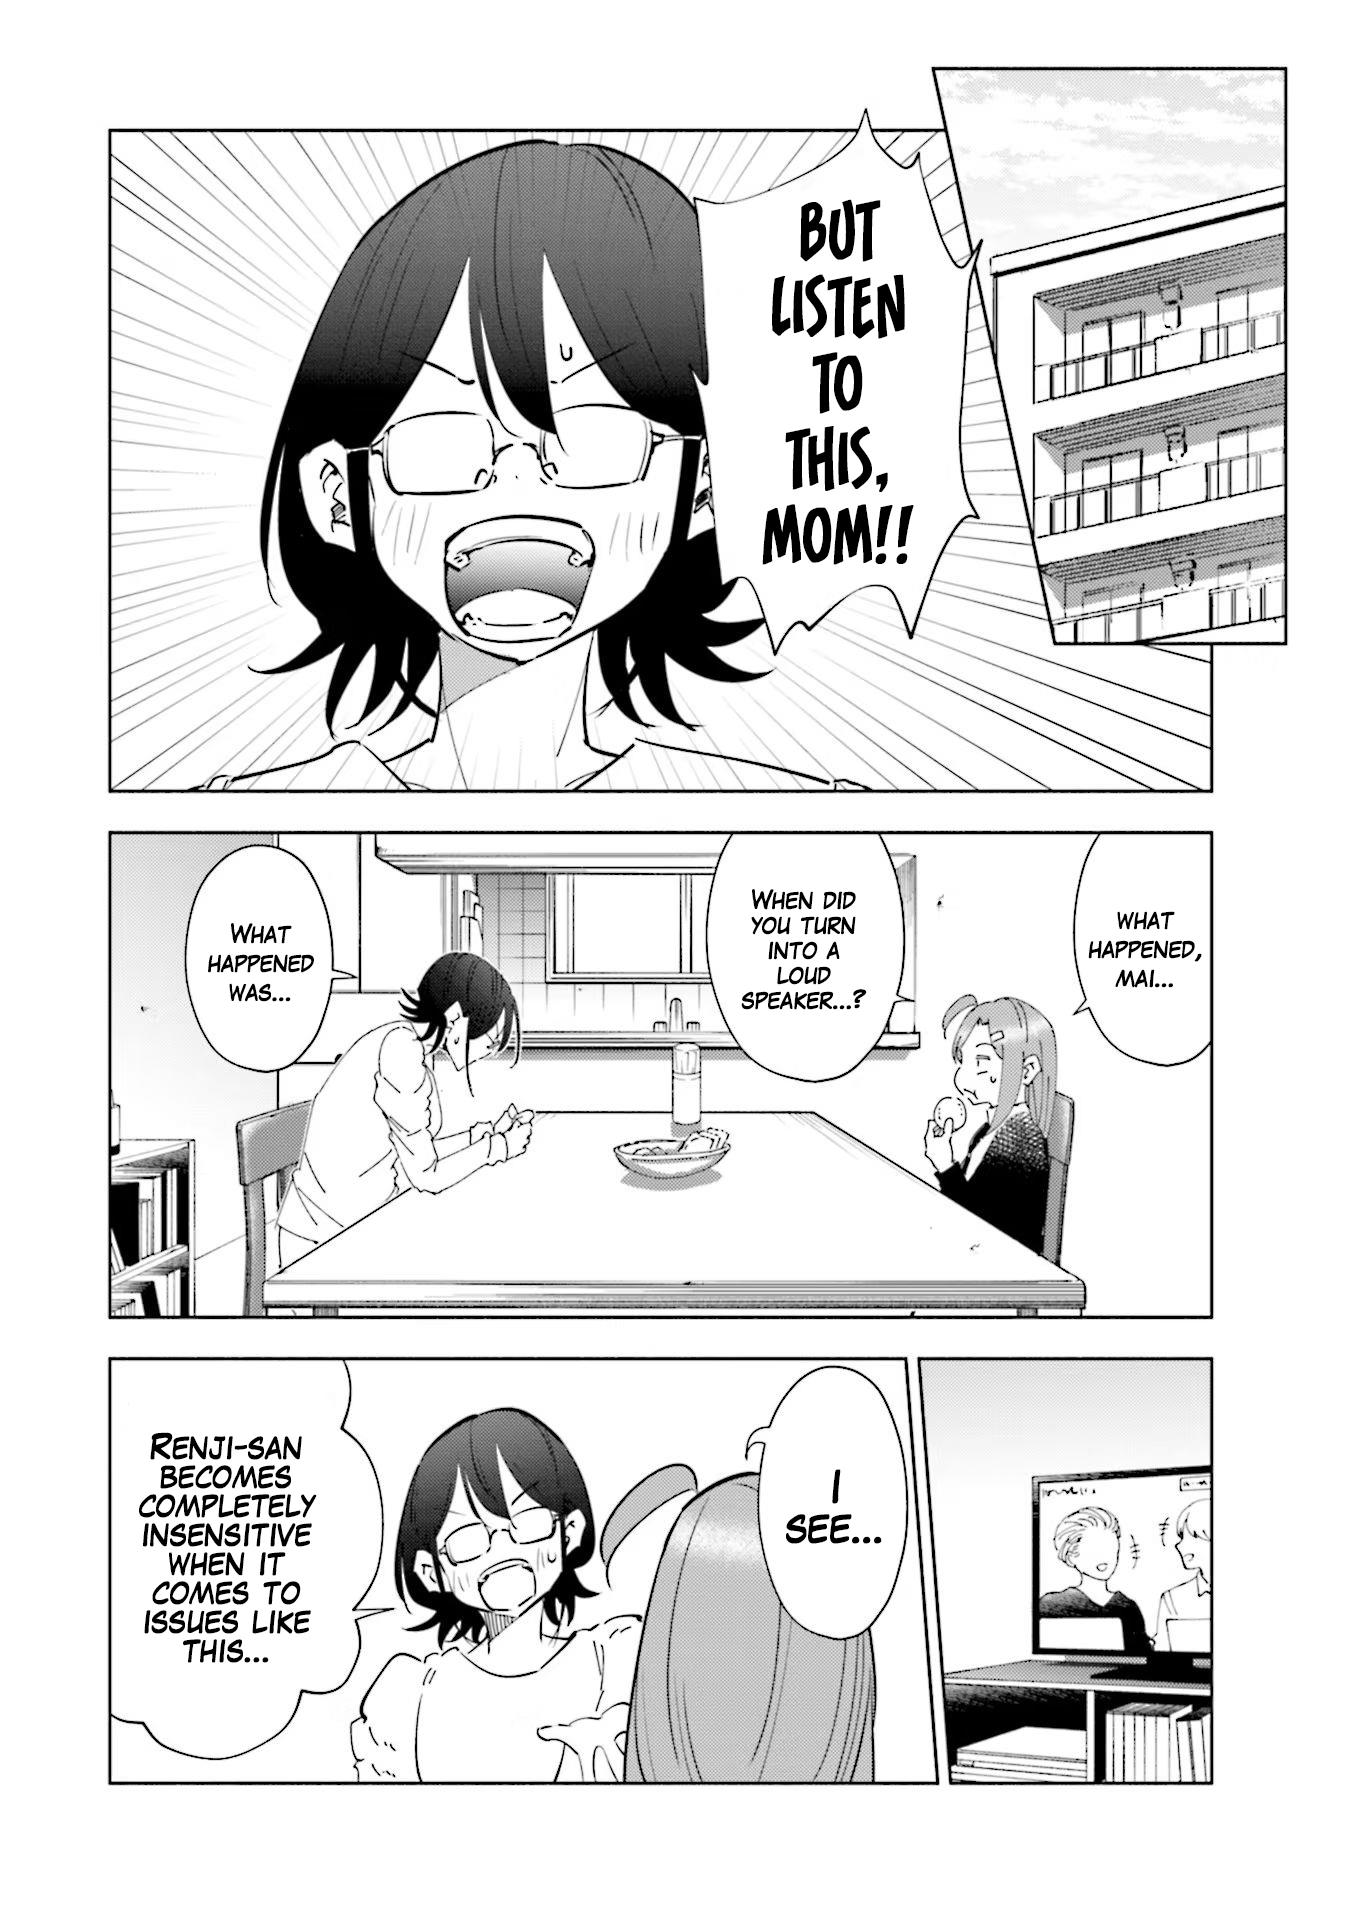 If My Wife Became An Elementary School Student - Page 2